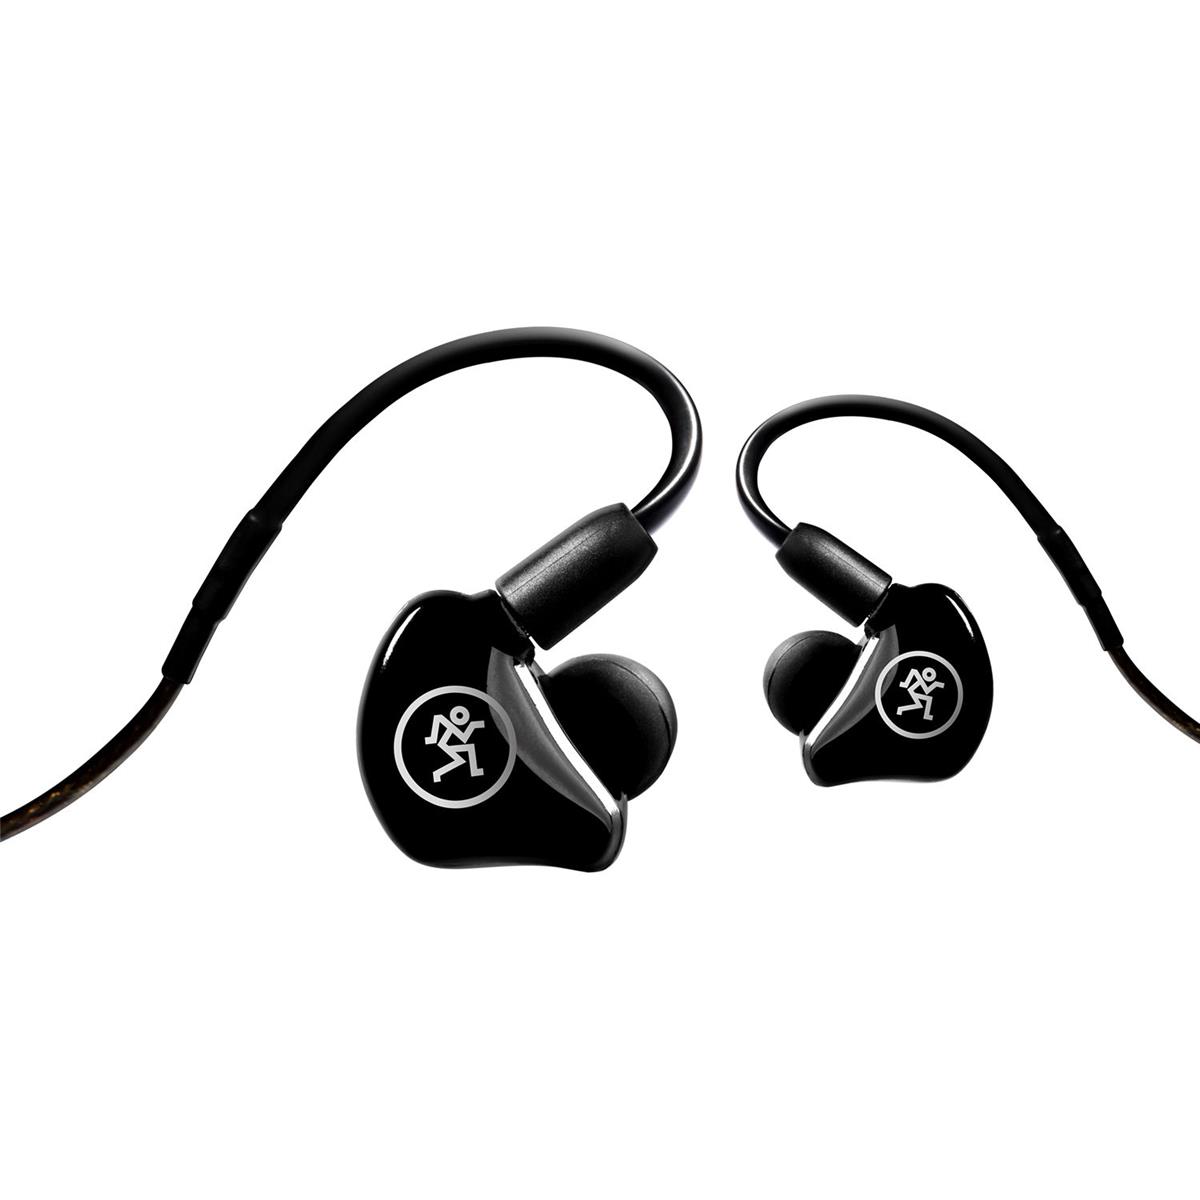 Image of Mackie MP-240 Dual Hybrid Driver Professional In-Ear Monitors